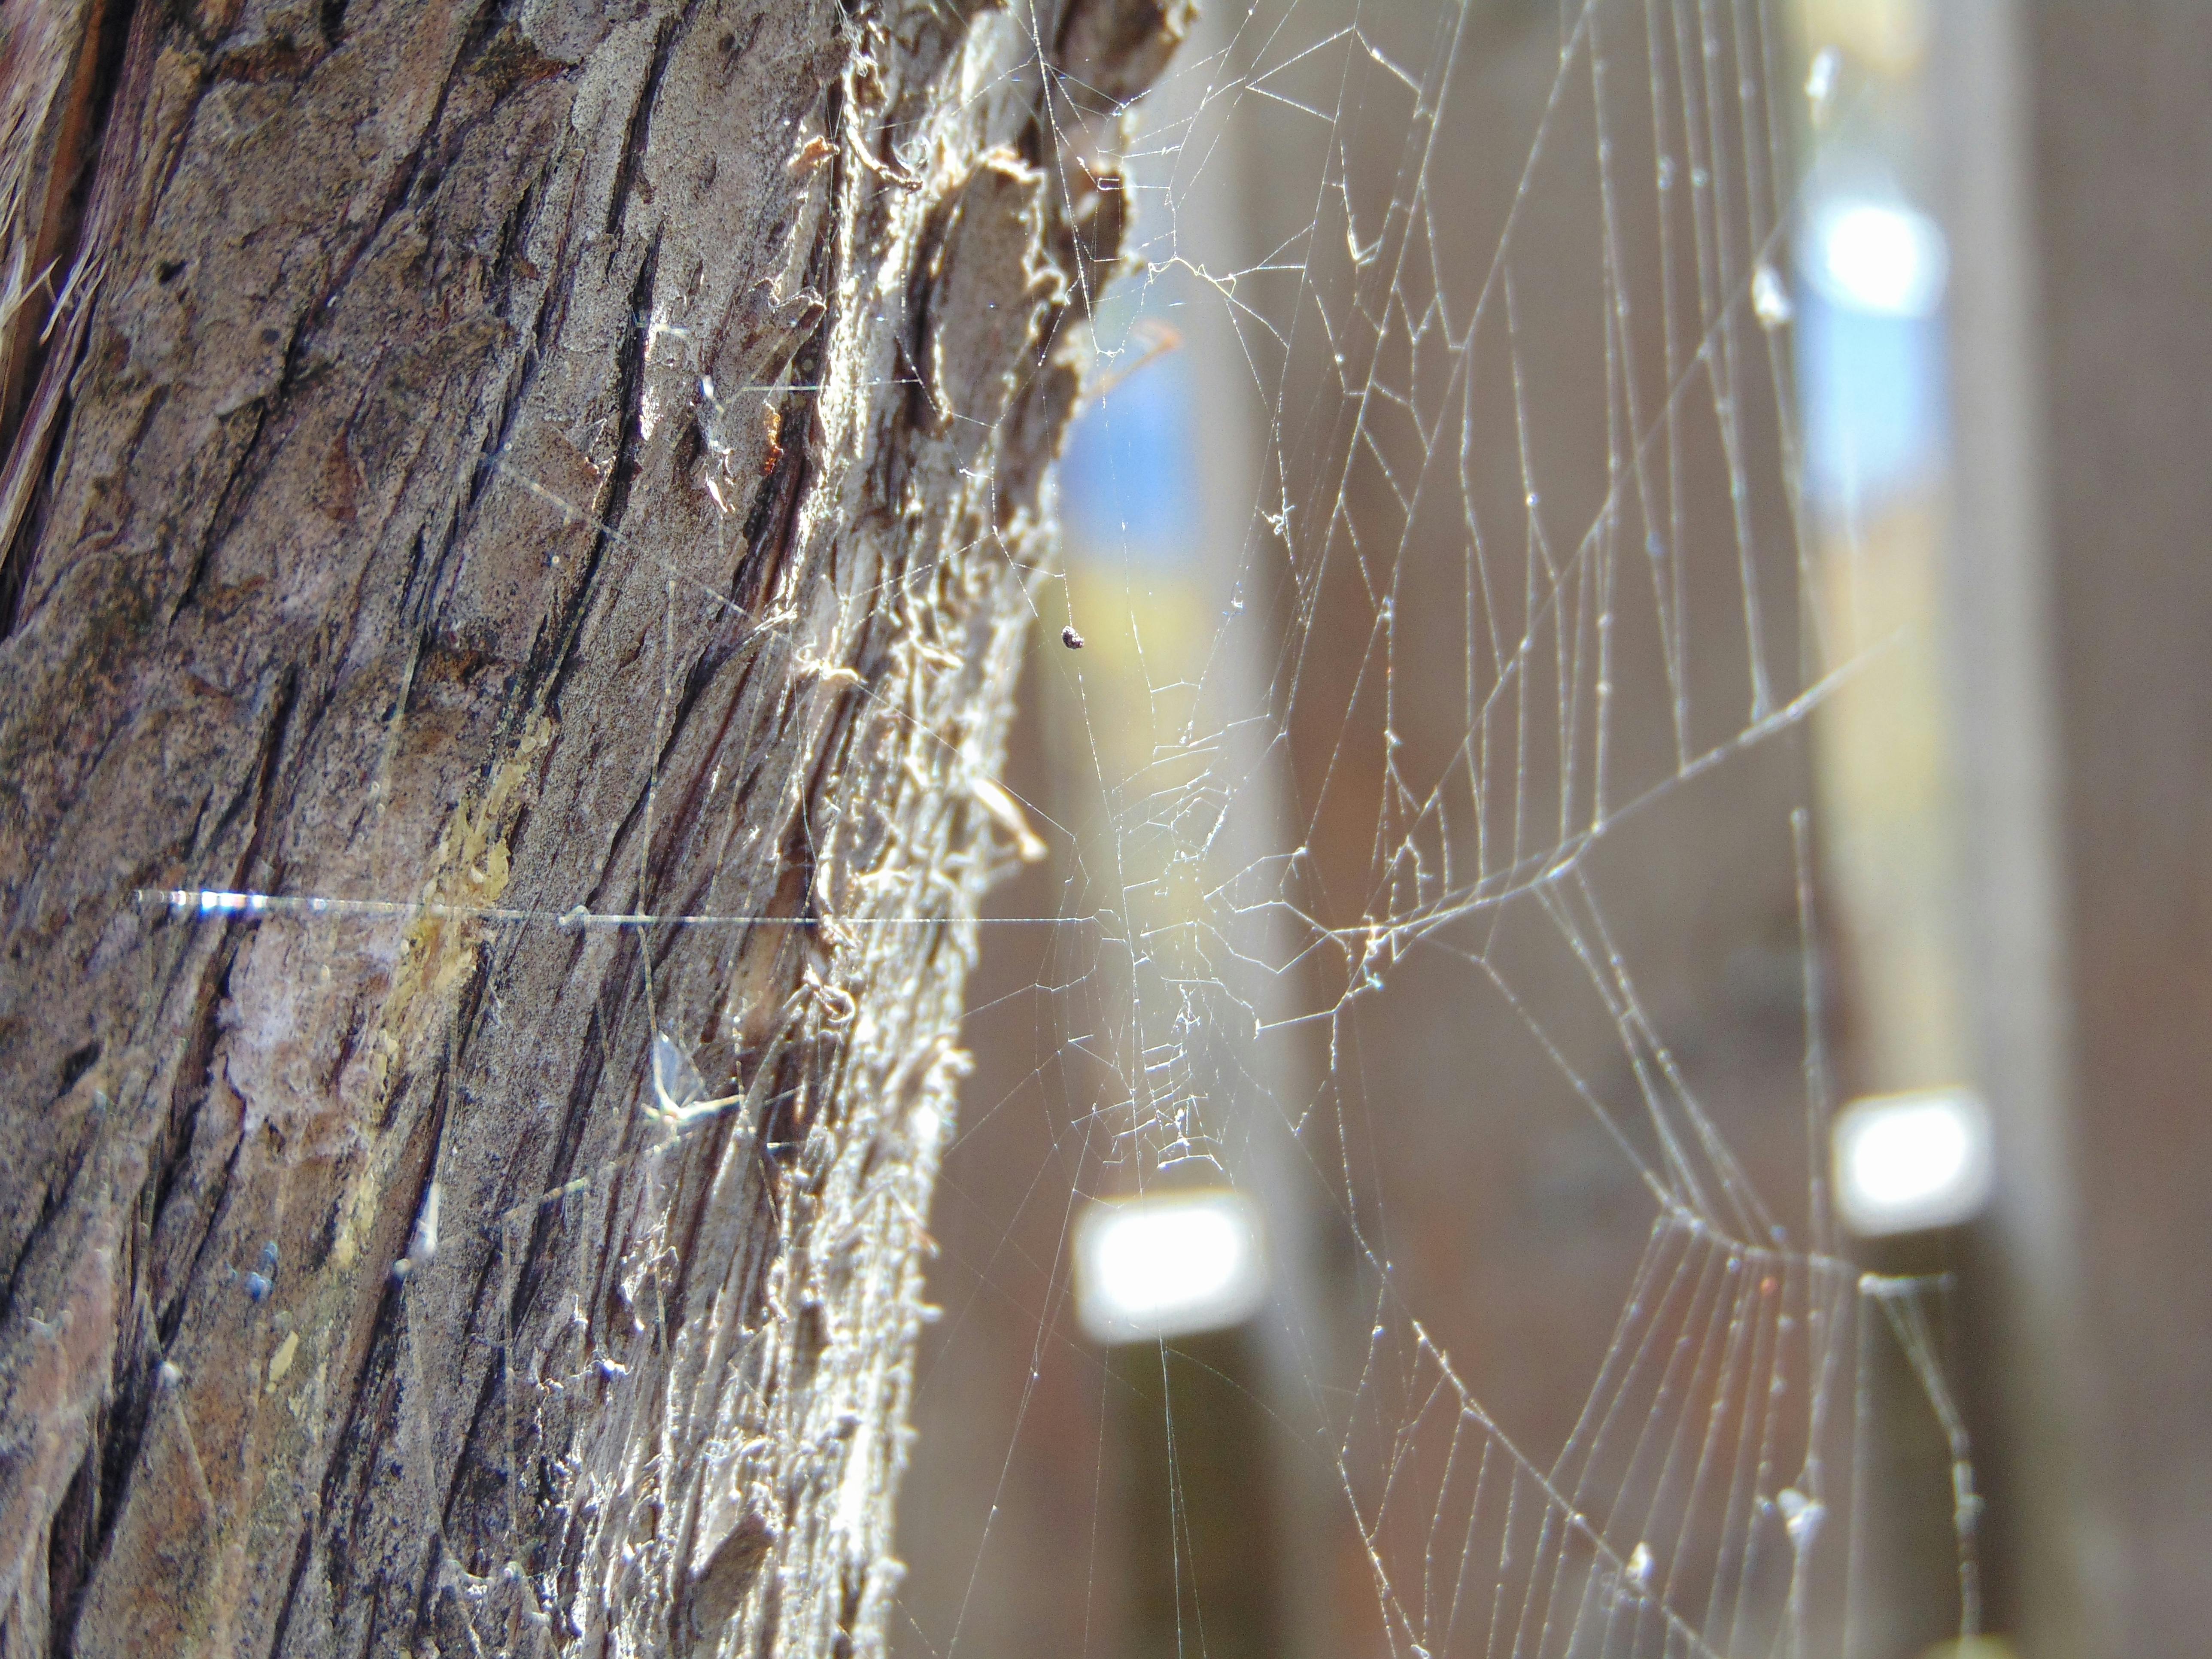 Free stock photo of network, spider web, tree